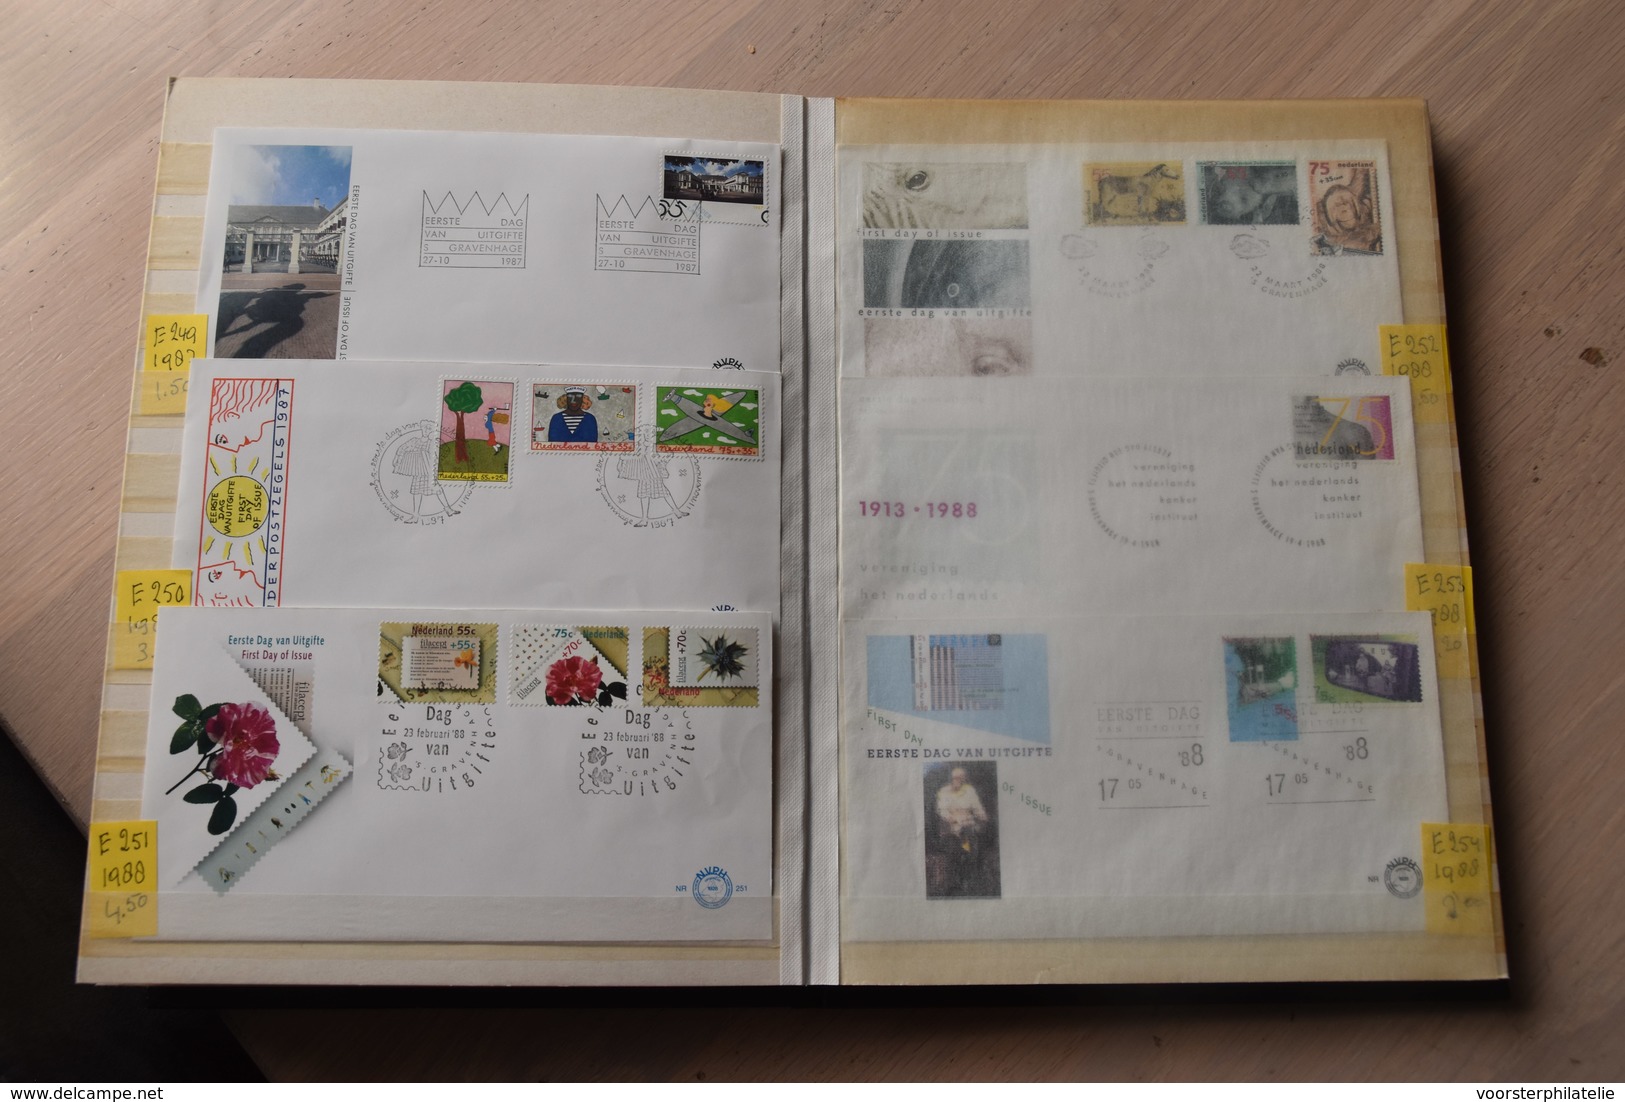 VD 1 ++ NETHERLANDS NEDERLAND LOT FDC'S USED AND BLANK. CHECK FOR PACKAGE SHIPMENT COSTS!!!!!!!